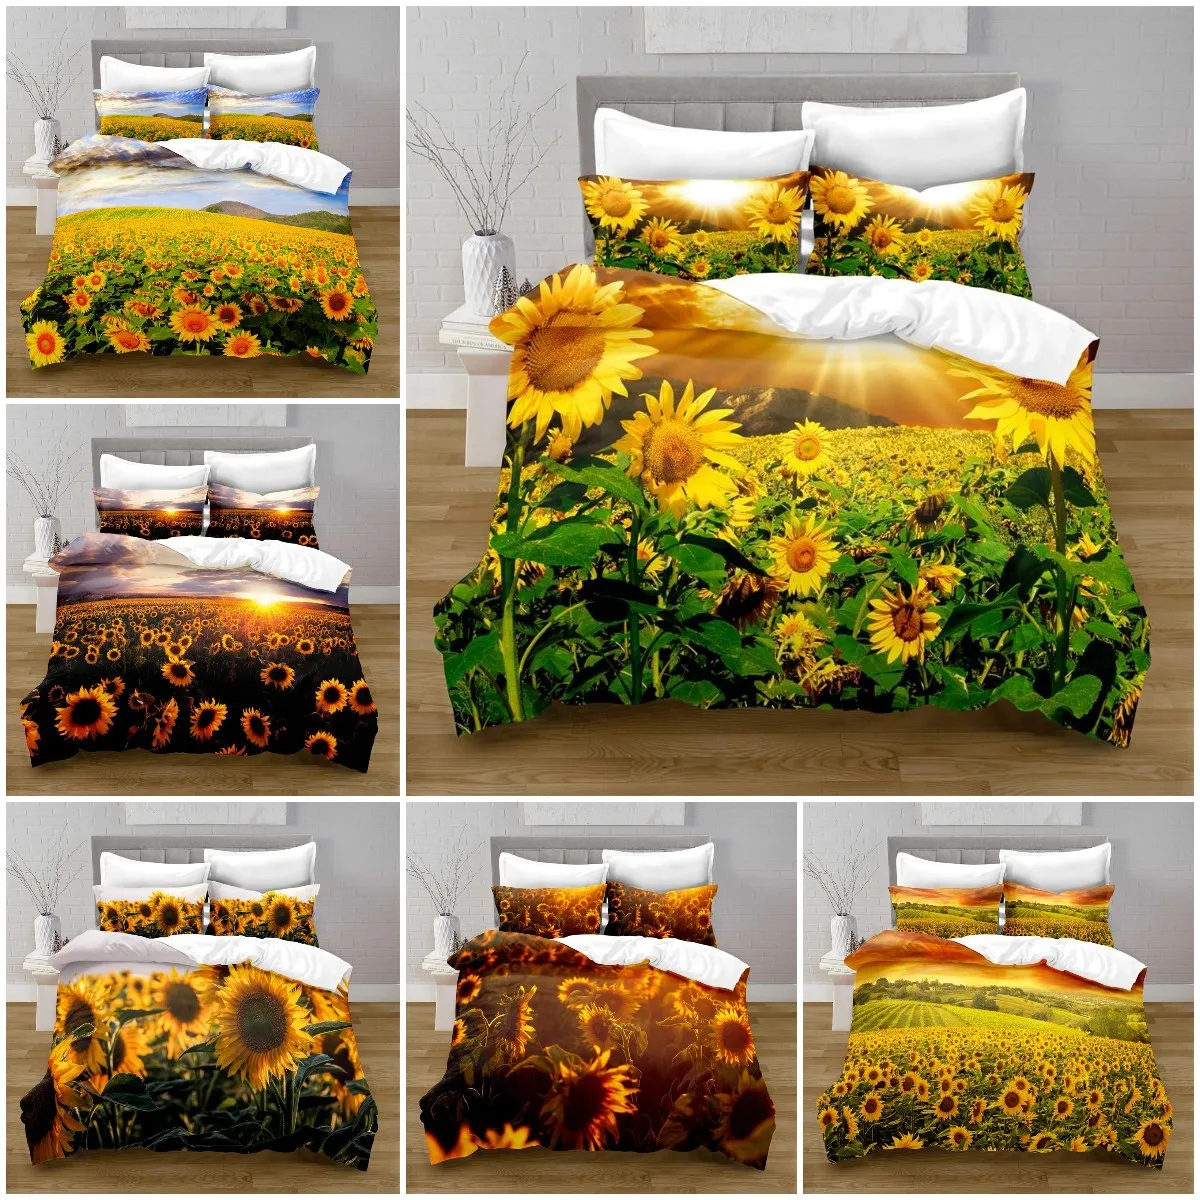 Sunflower Duvet Cover Set Yellow Flowers Lush Sunflowers In The Field Bedding Set For Girls Botanical Floral Print Quilt Cover